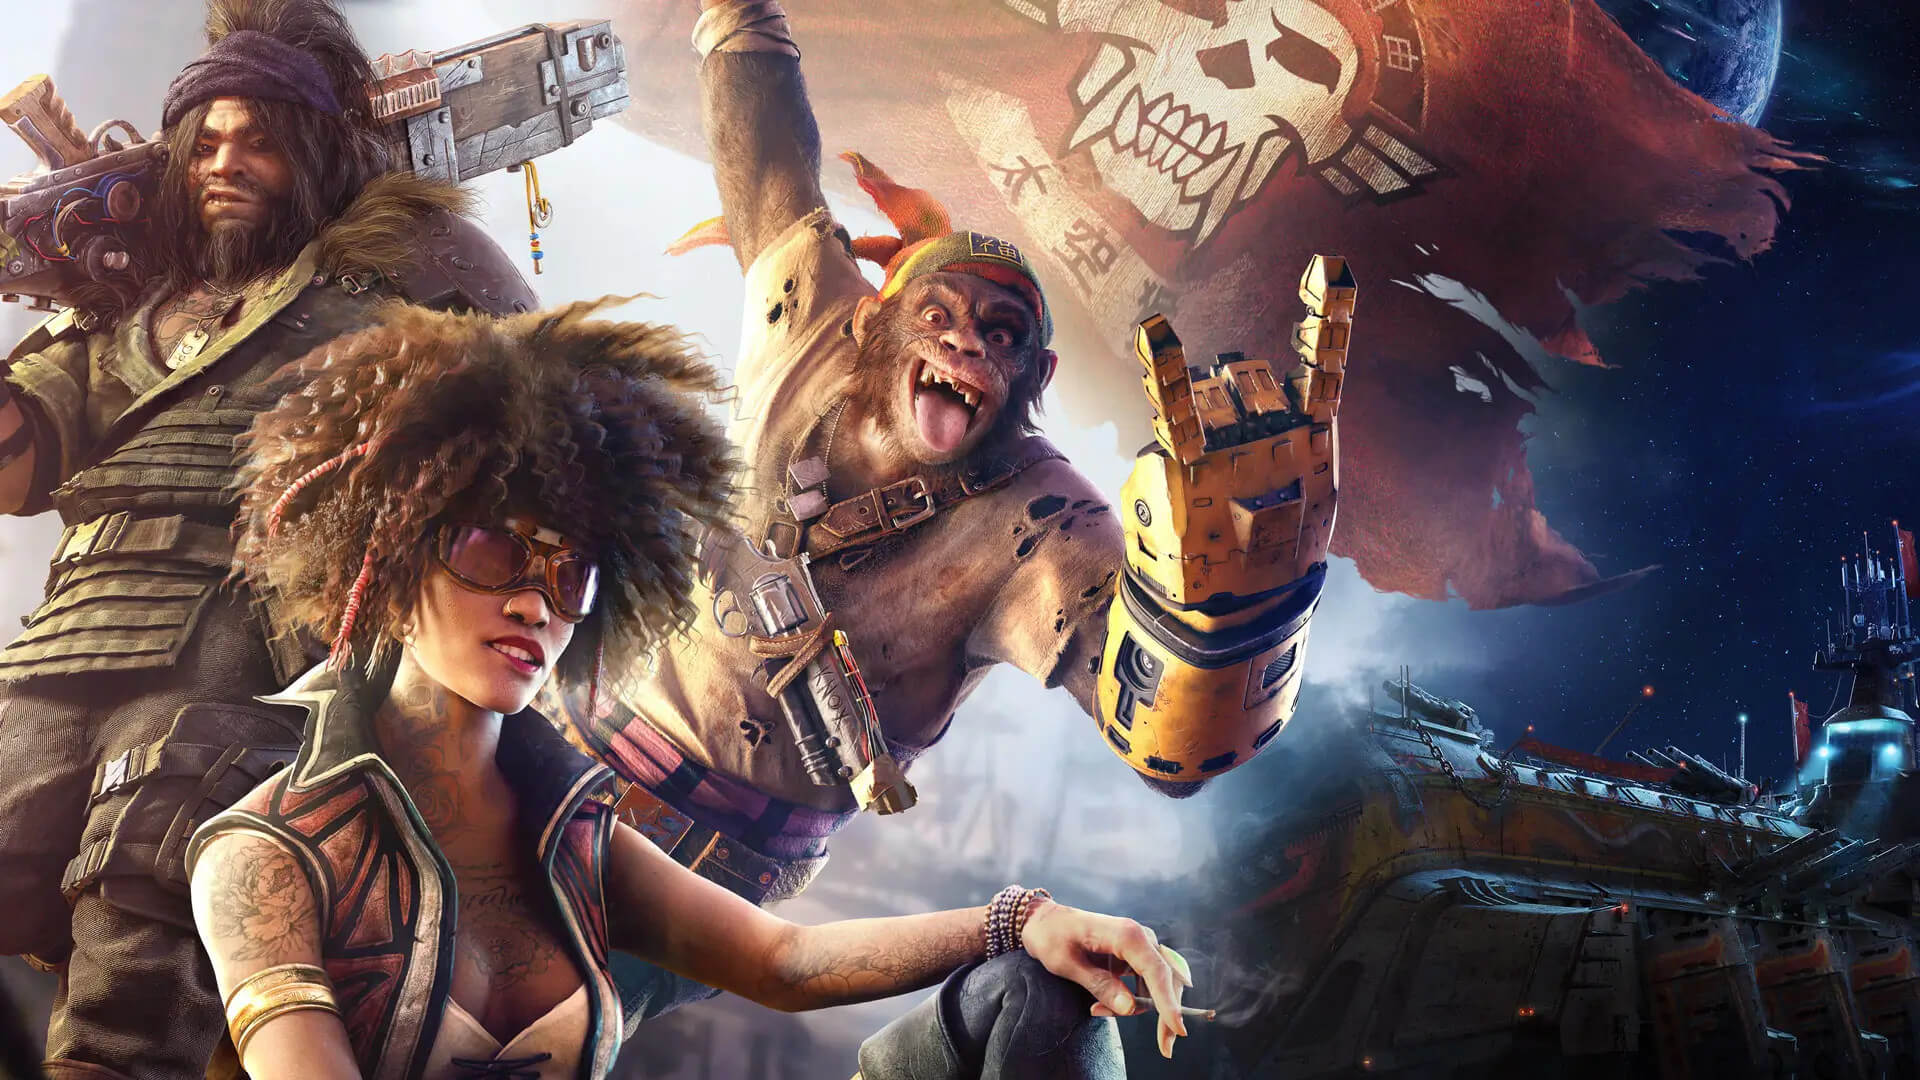 Beyond Good and Evil 2, another Michel Ancel project that suffered extensive delays